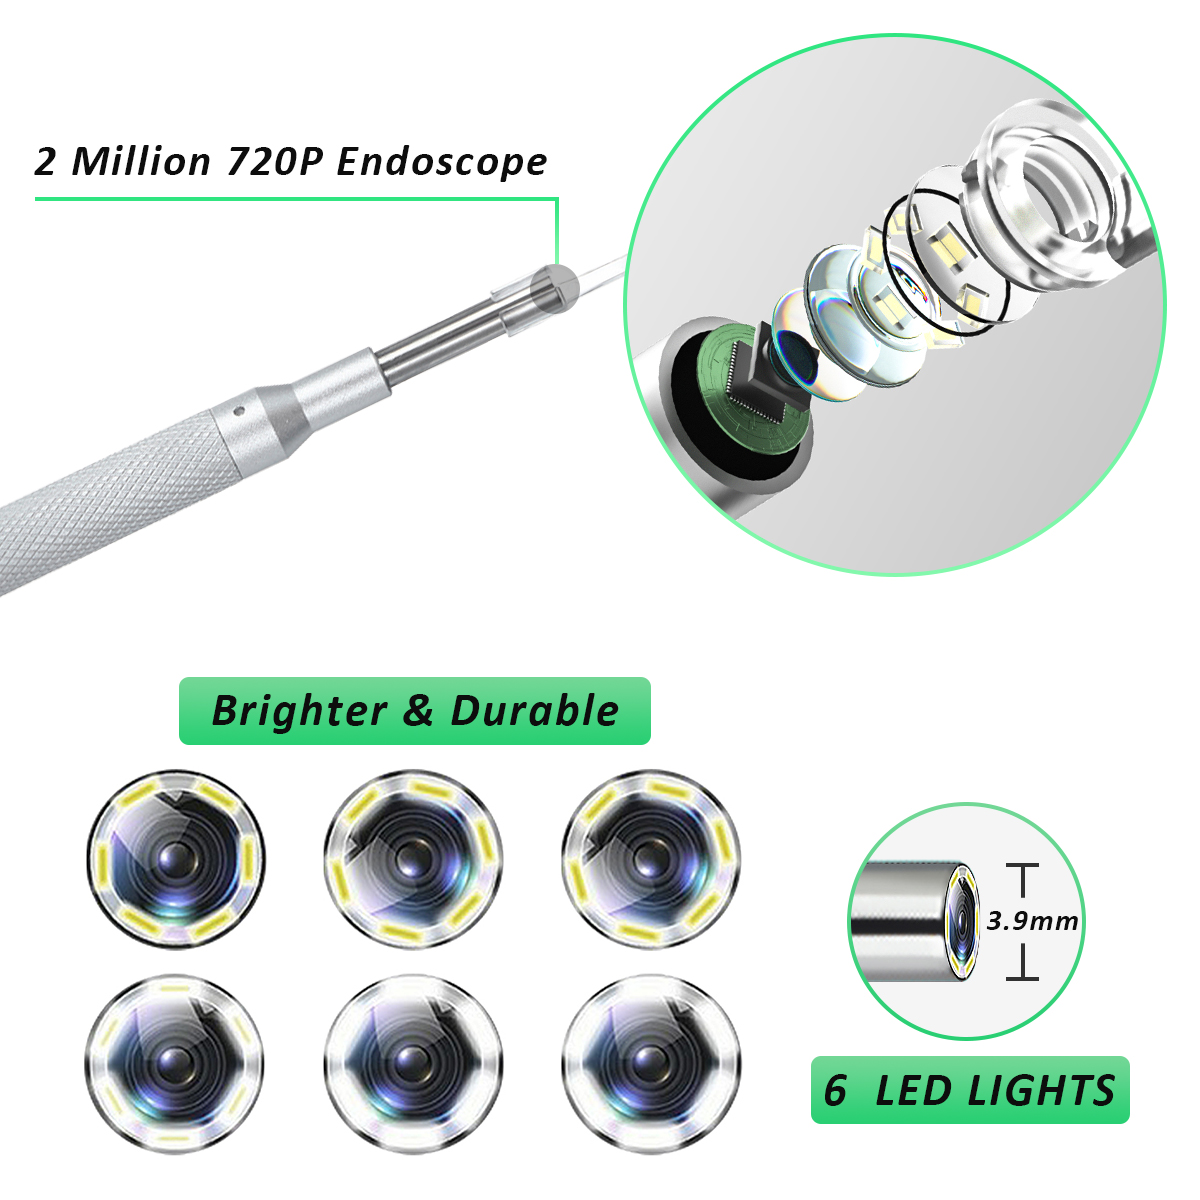 39mm-Visual-Thin-Lens-HD-Ear-Endoscopes-with-Earwax-6-Adjustable-LED-Lights-Ear-Cleaning-Tool-1737017-2